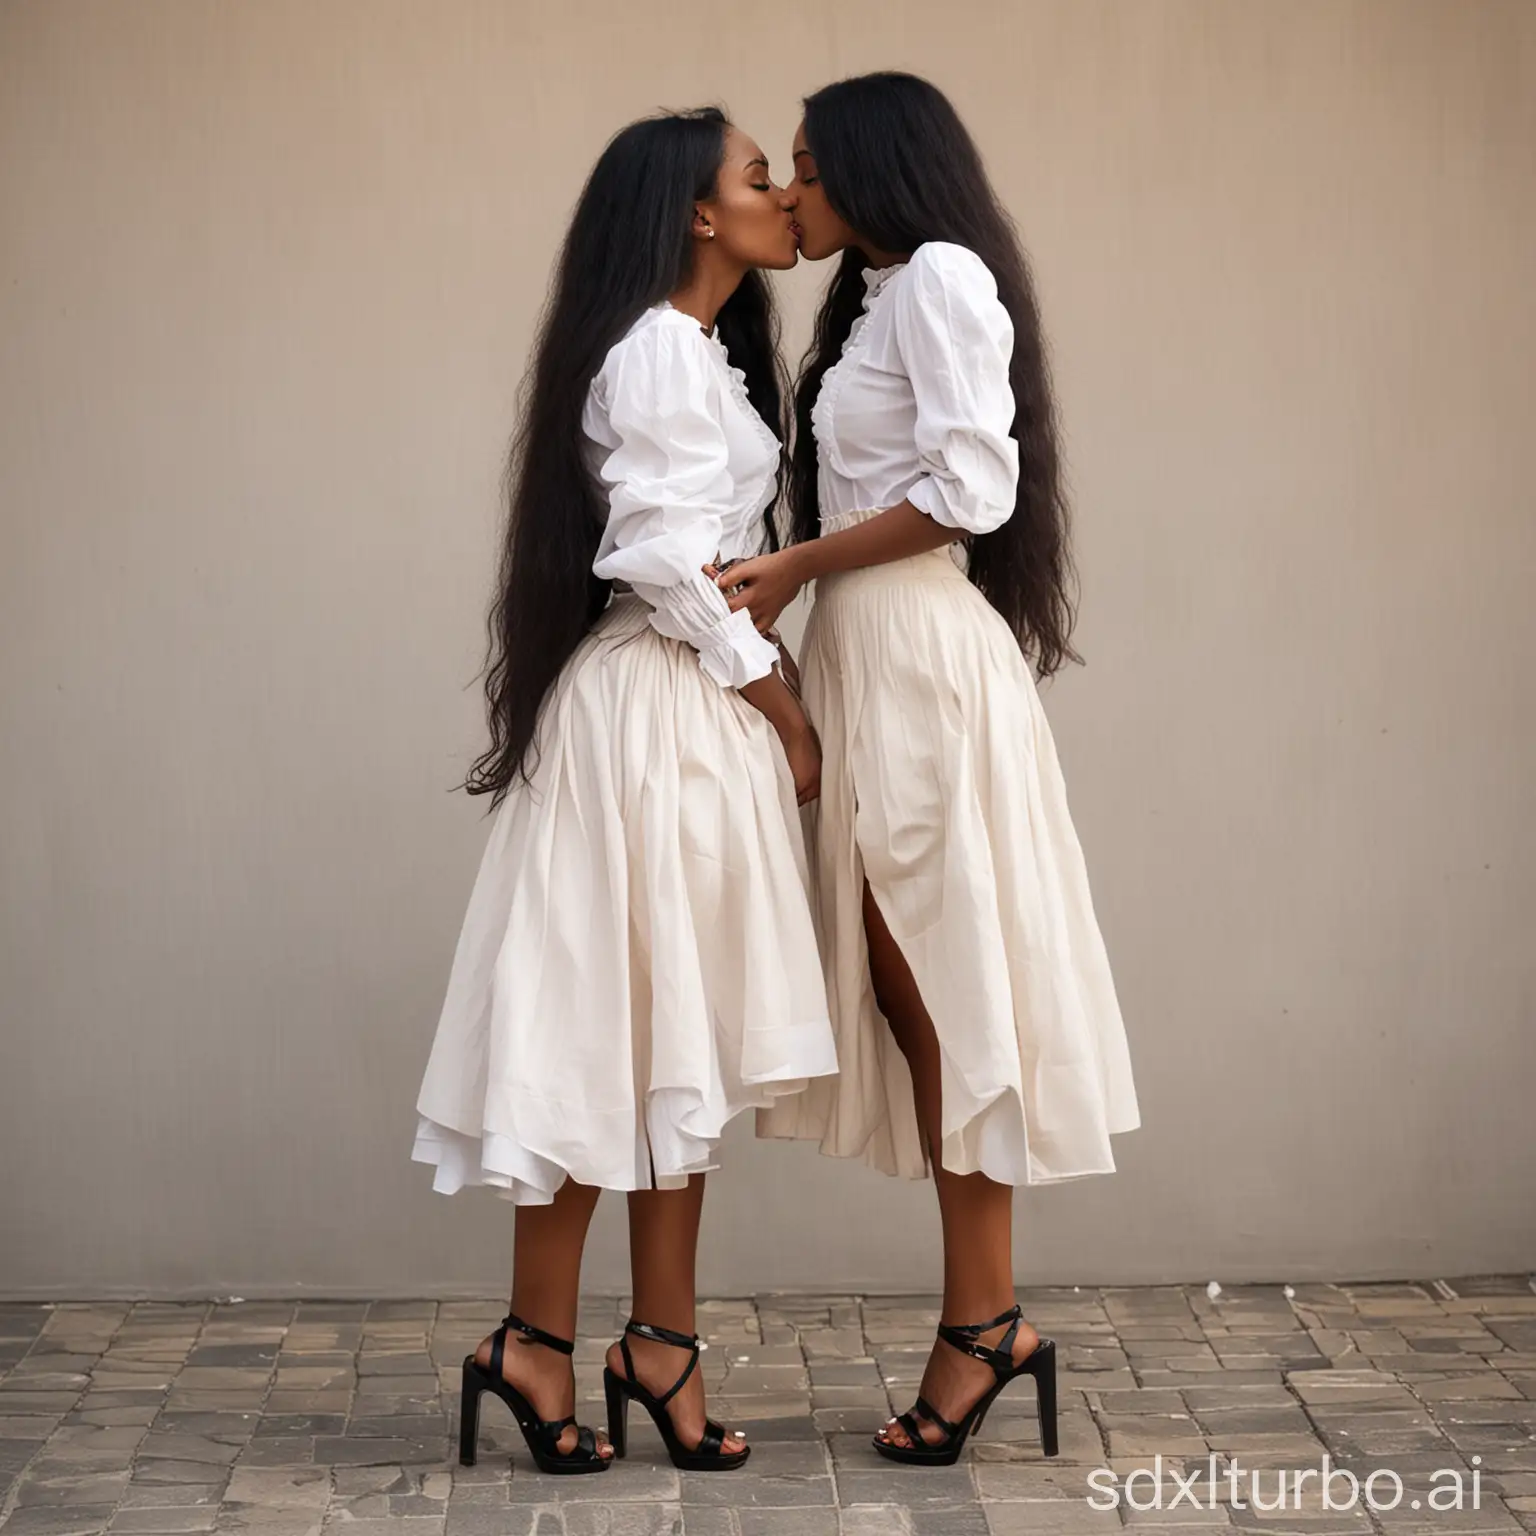 Two-Stylish-Black-Women-Embracing-in-Tight-Outfits-and-Platform-Sandals